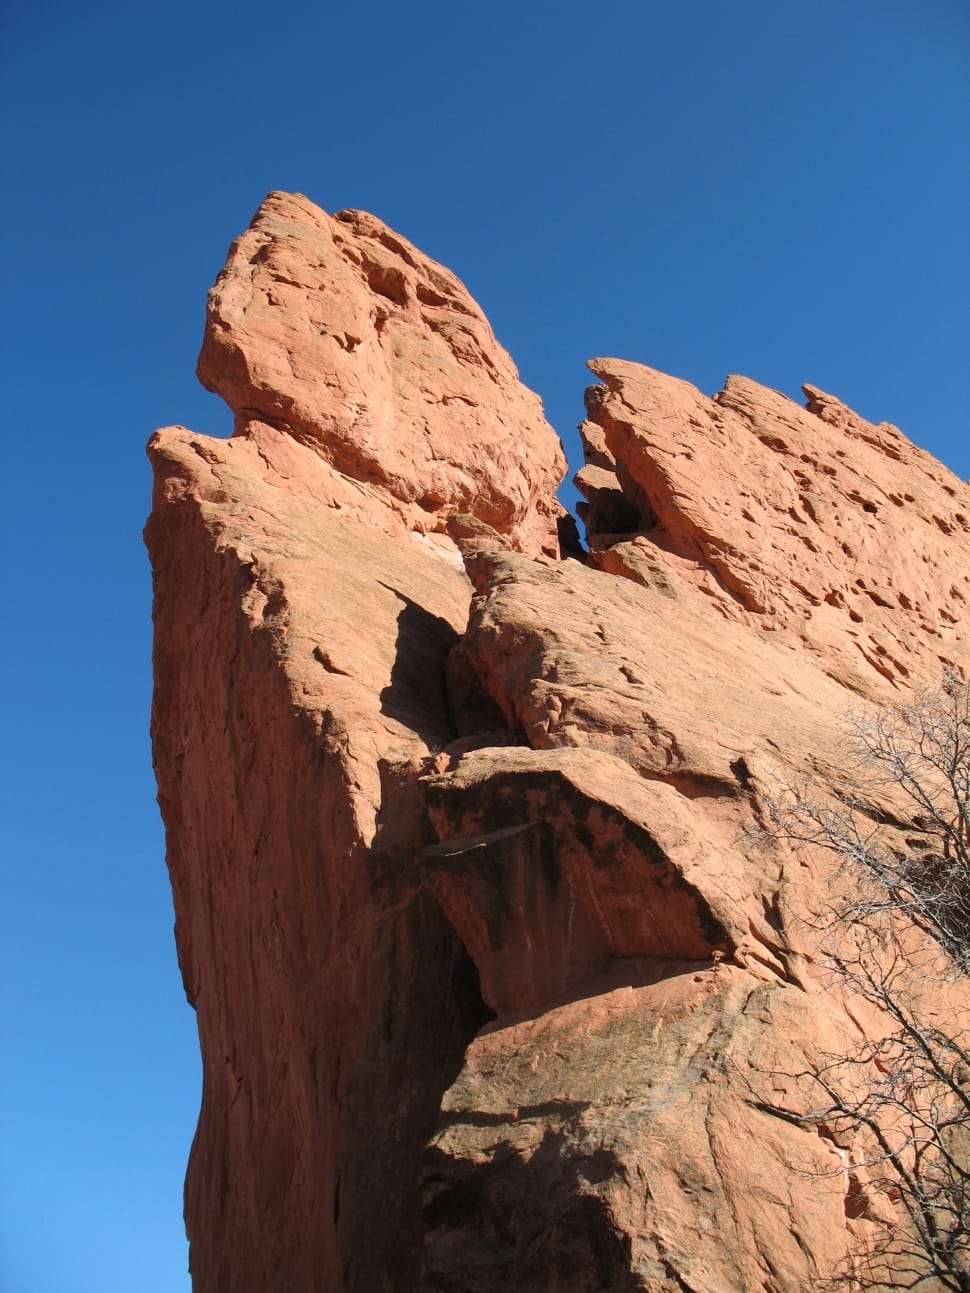 beige rock formation with gray dried branches during daytime under clear blue sky preview